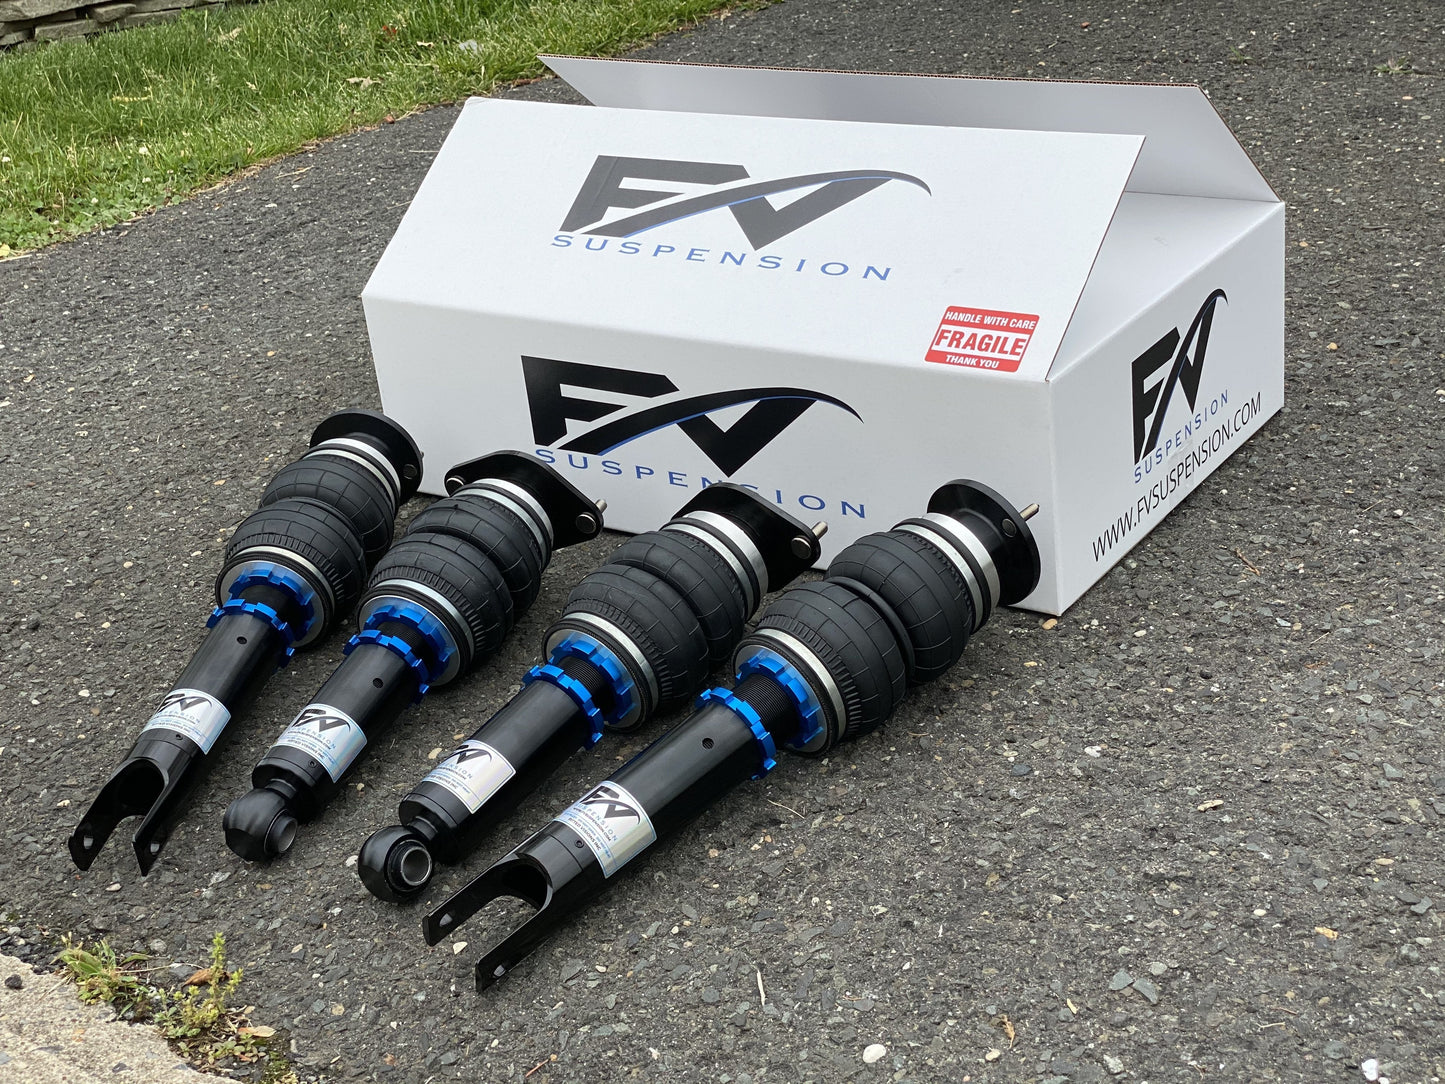 FV Suspension 3H Tier 3 Complete Air Ride kit for 13-15 Acura Ilx - Full Kit